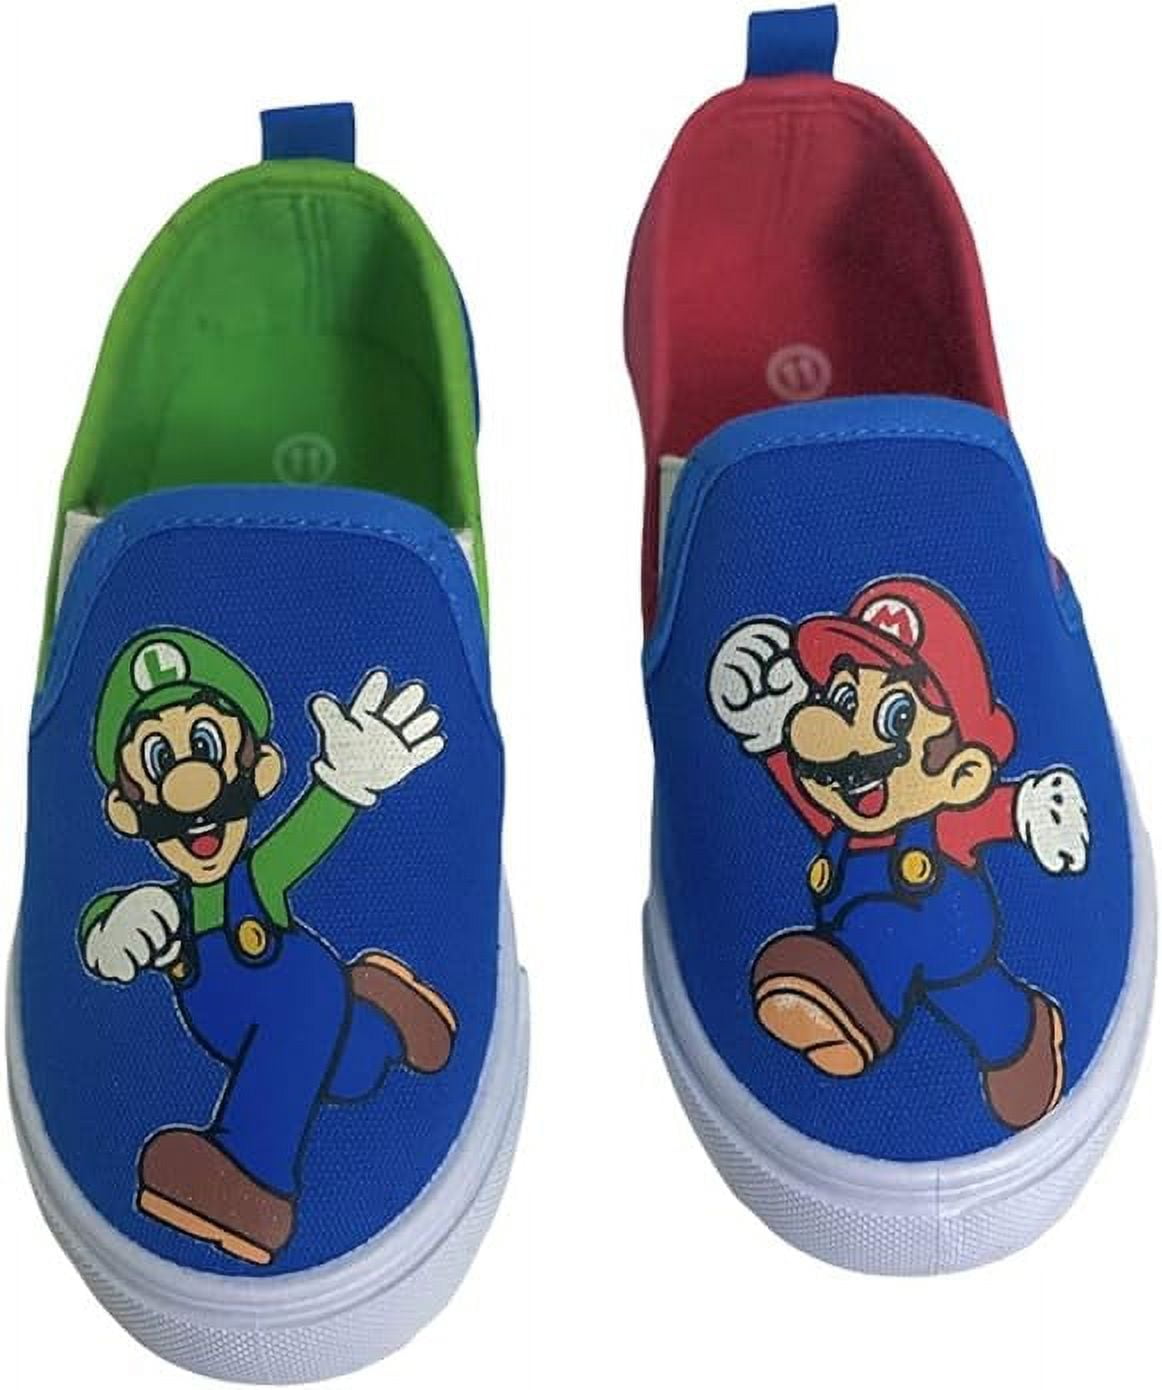 Nintendo Super Mario Brothers Kart Trainers Sneakers Light up shoes blue  black | eBay